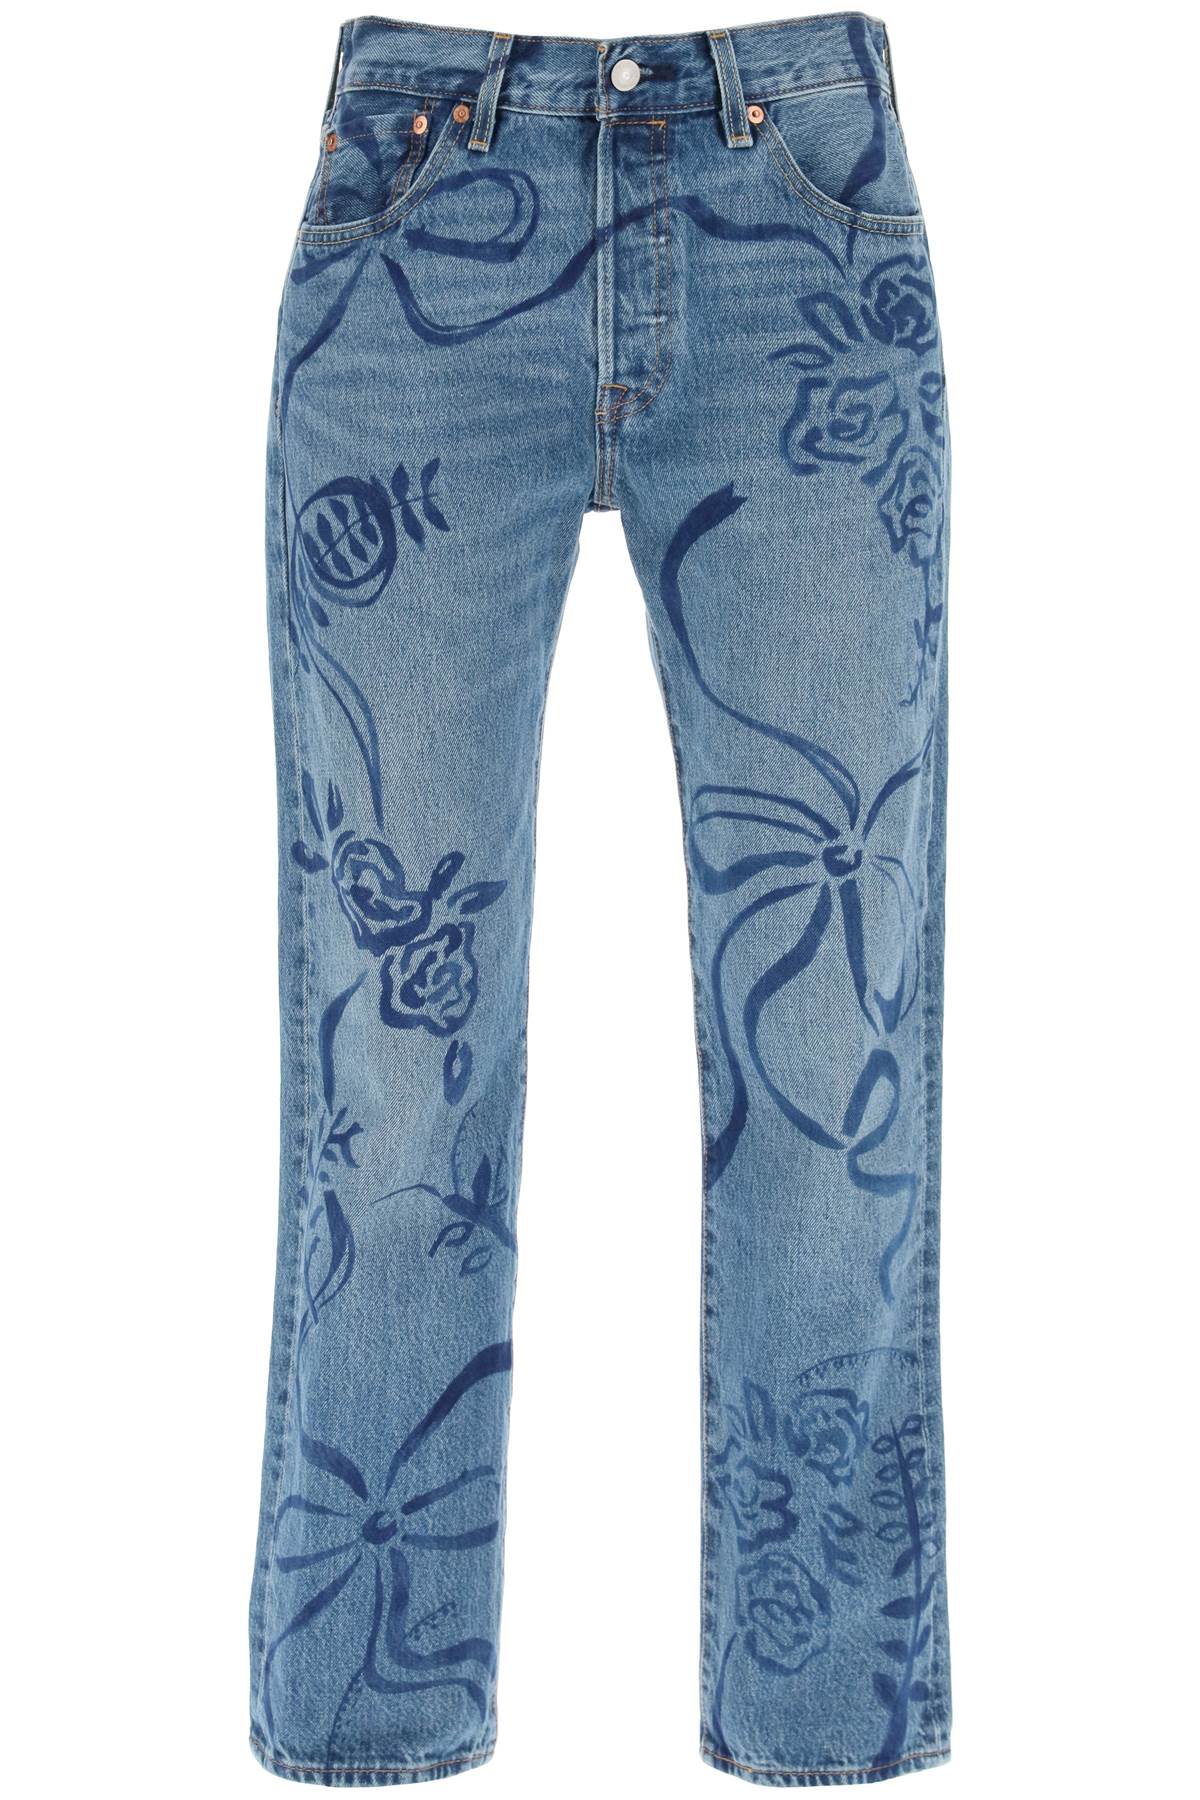 Shop Collina Strada Upcycled Levis 501s In Laurel Ashleigh Floral In Laurel Ashleigh Floral (blue)